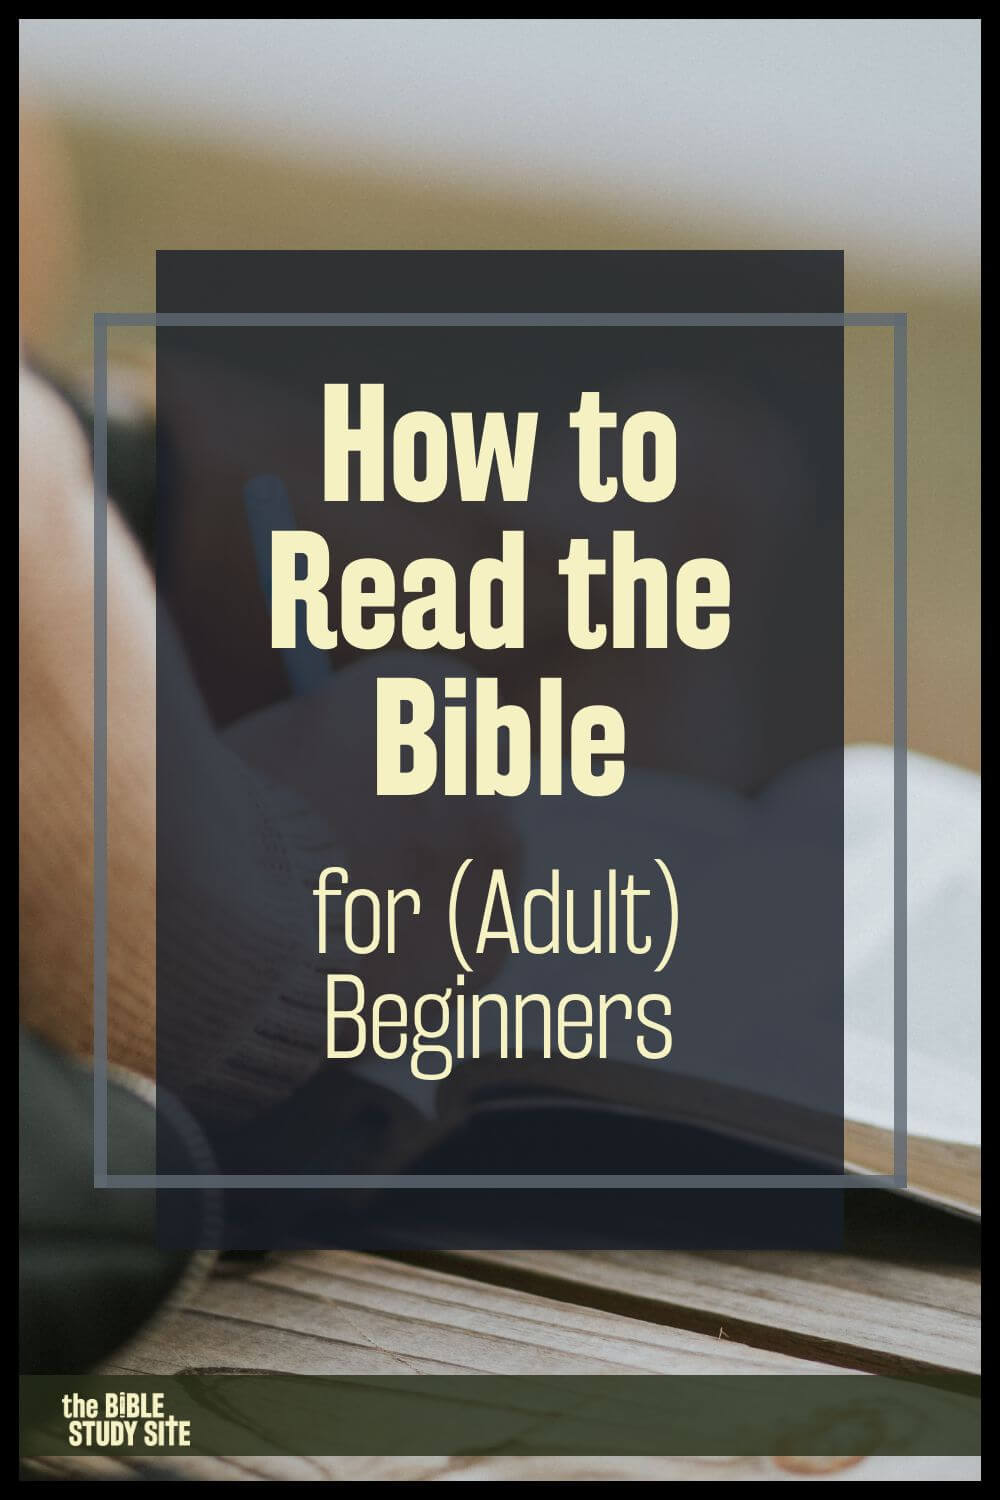 How to Read the Bible for (Adult) Beginners (pin)